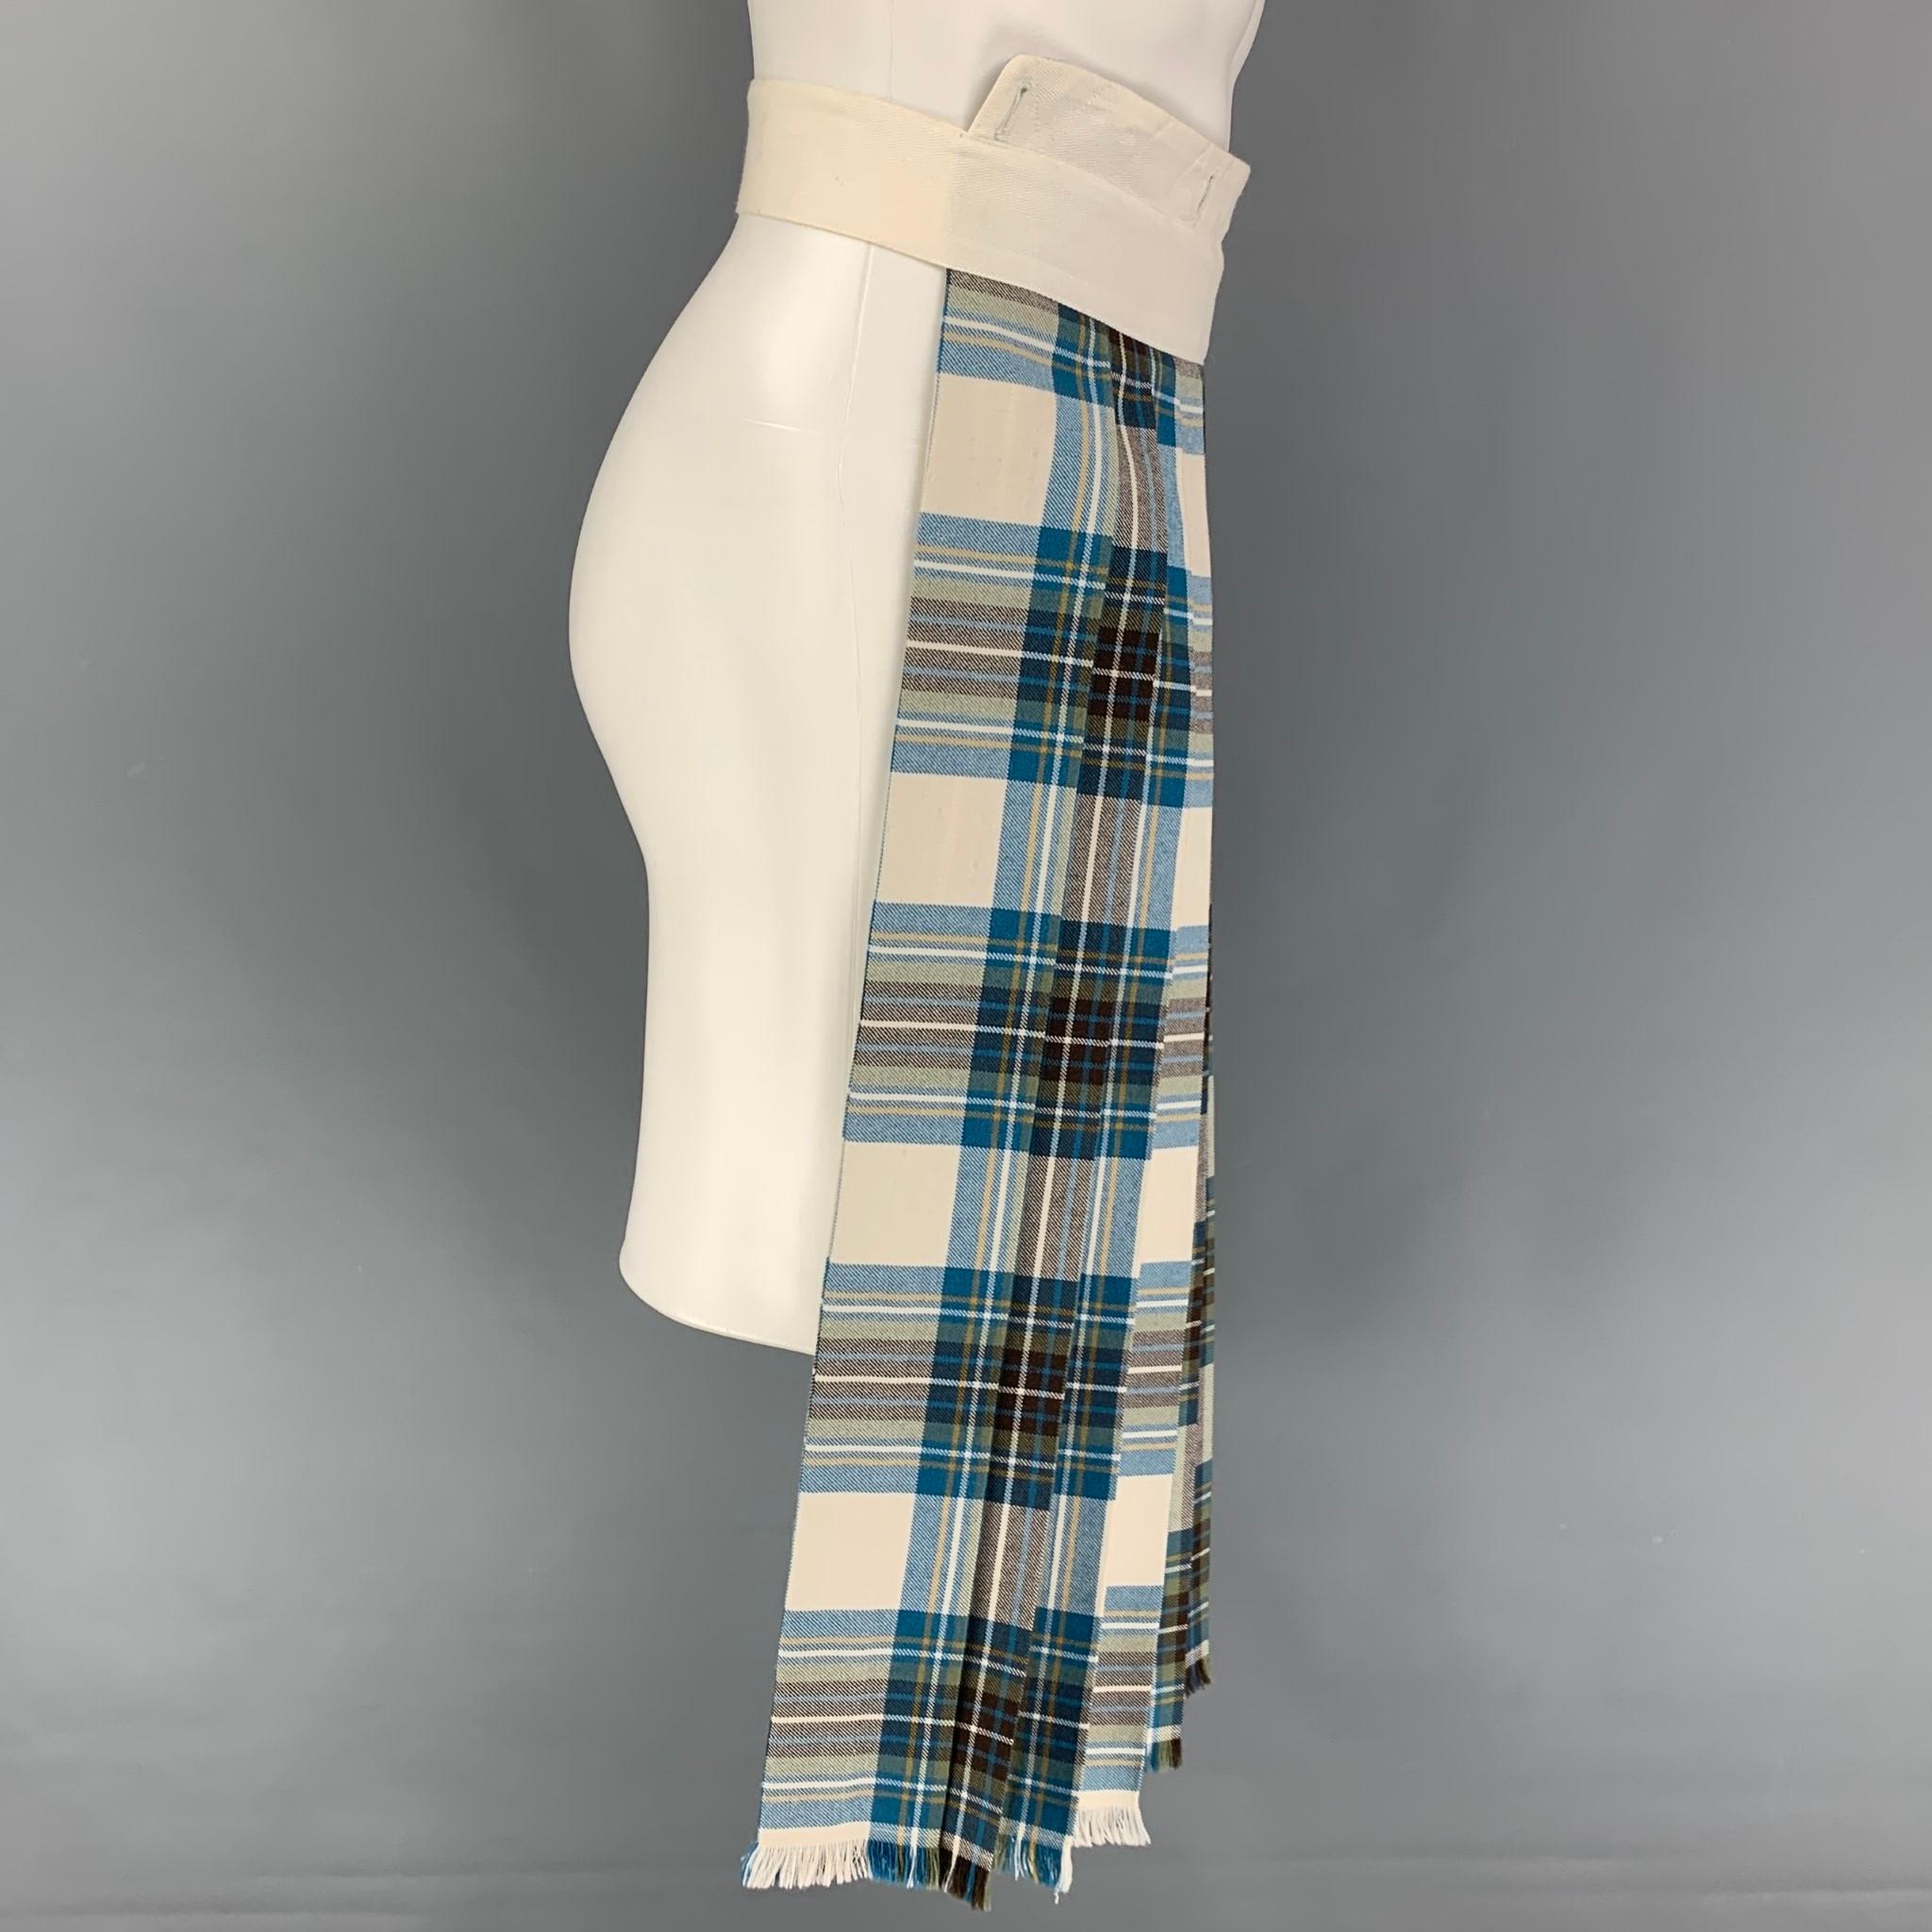 DRIES VAN NOTEN kilt skirt panel comes in a blue & grey plaid material featuring a fringe trim and a adjustable belt.

Very Good Pre-Owned Condition.
Marked: One Size

Measurements:

Waist: 15 in. 
Length: 29 in. 